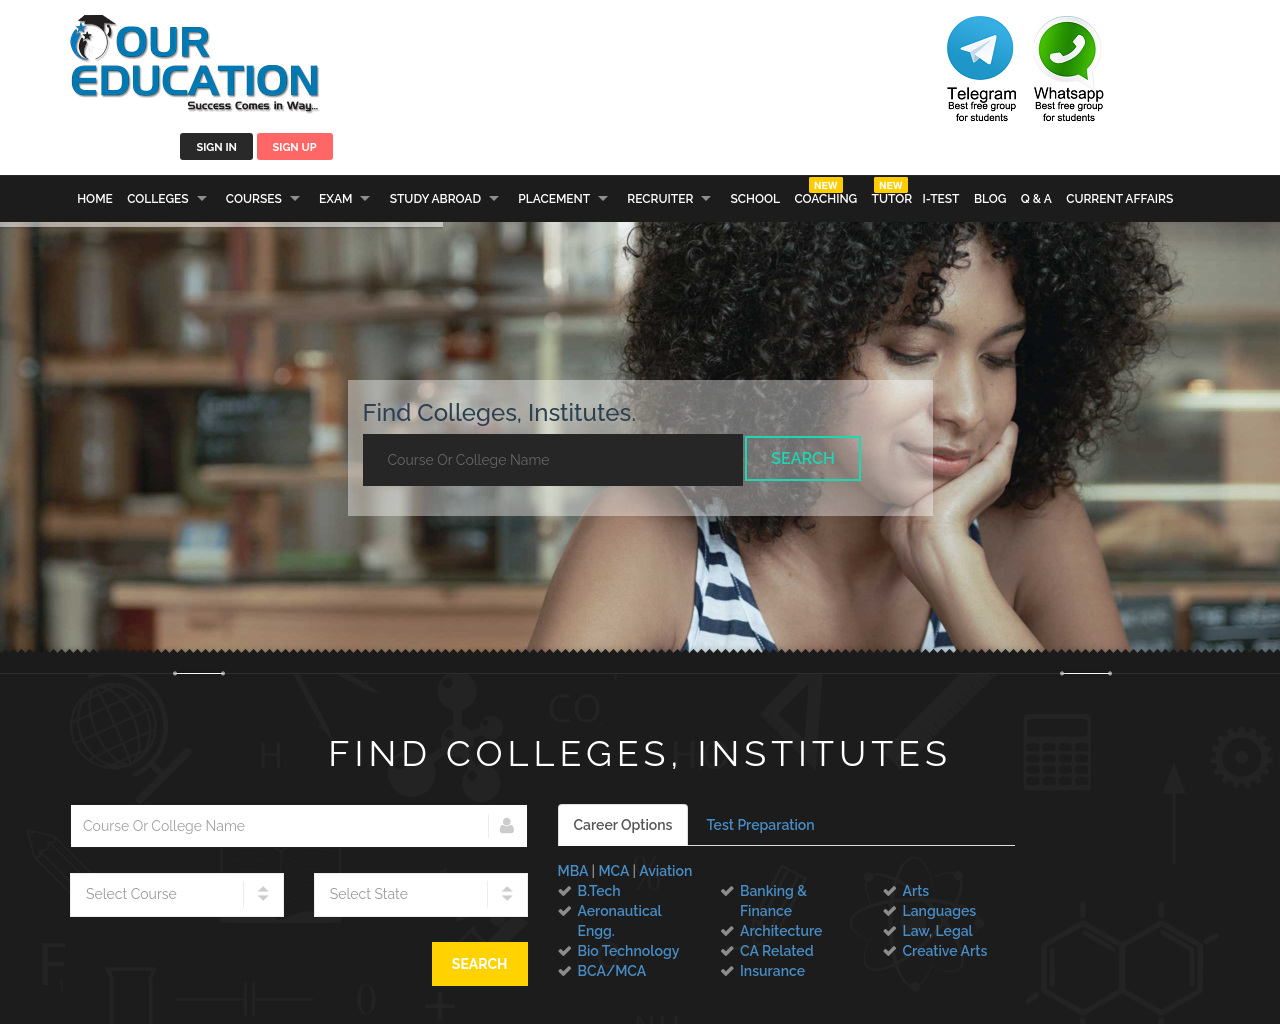 oureducation.in